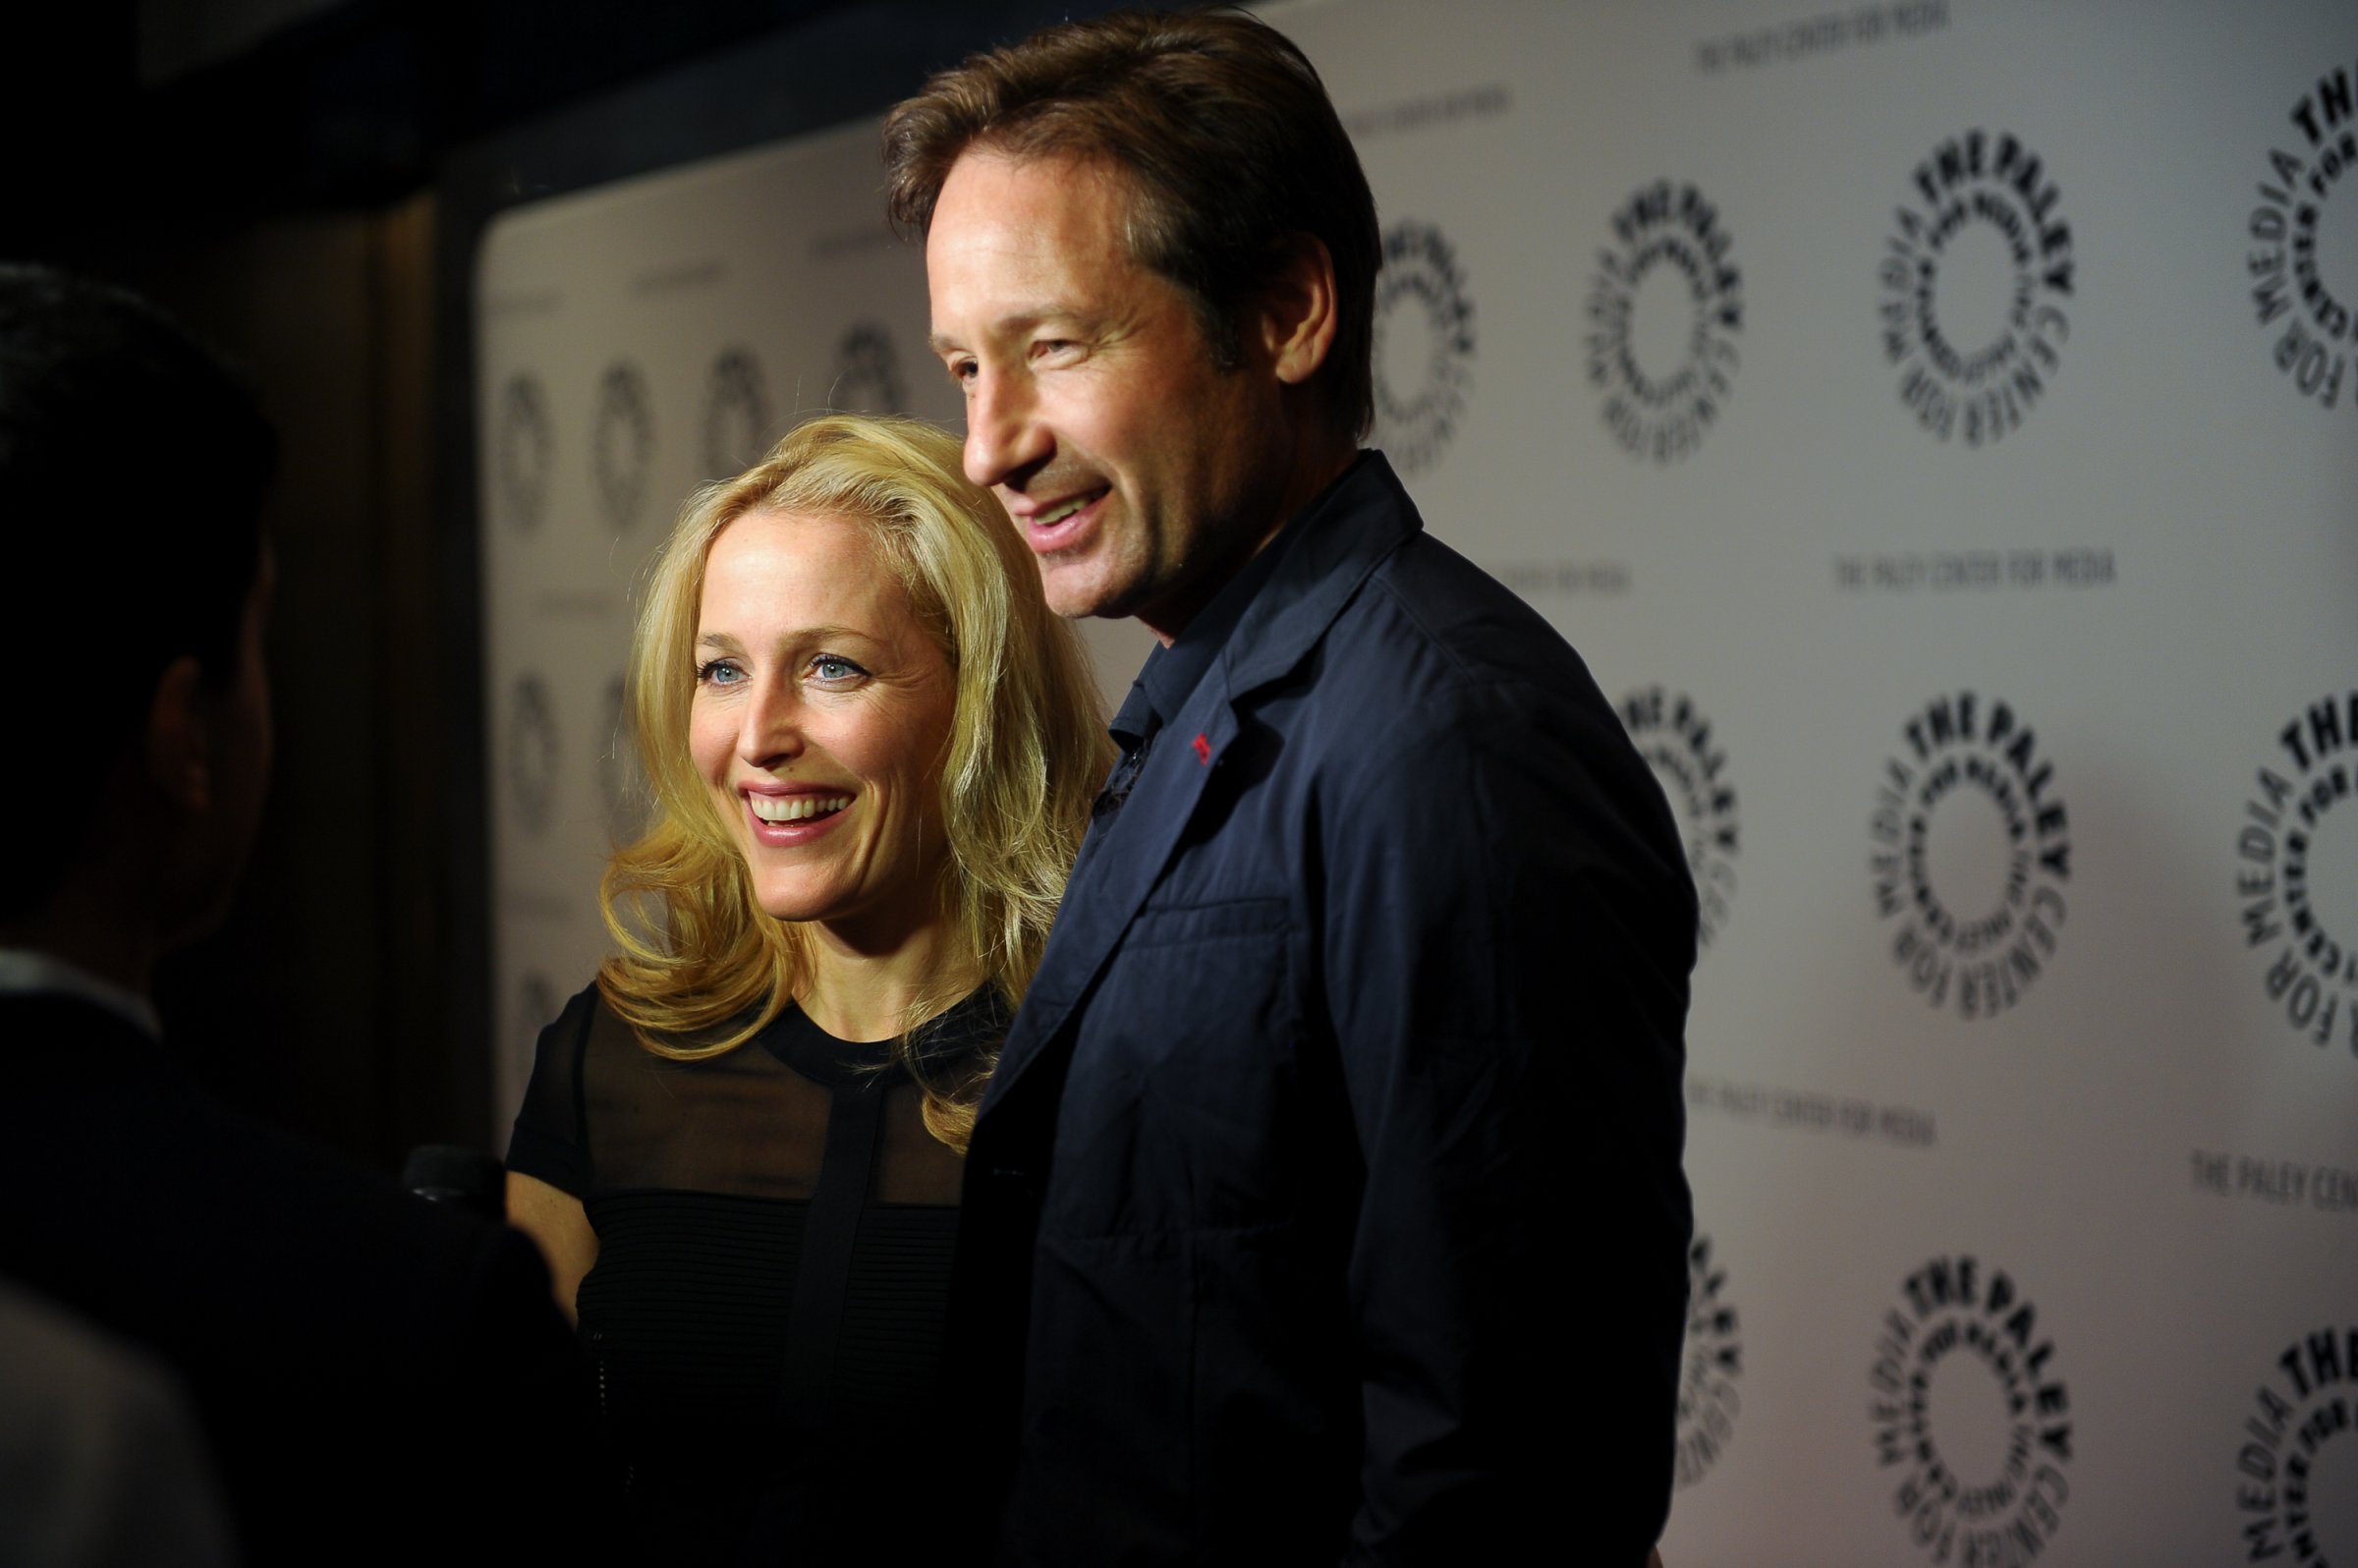 The Paley Center For Media Presents The Truth Is Here: David Duchovny And Gillian Anderson On "The X-Files"